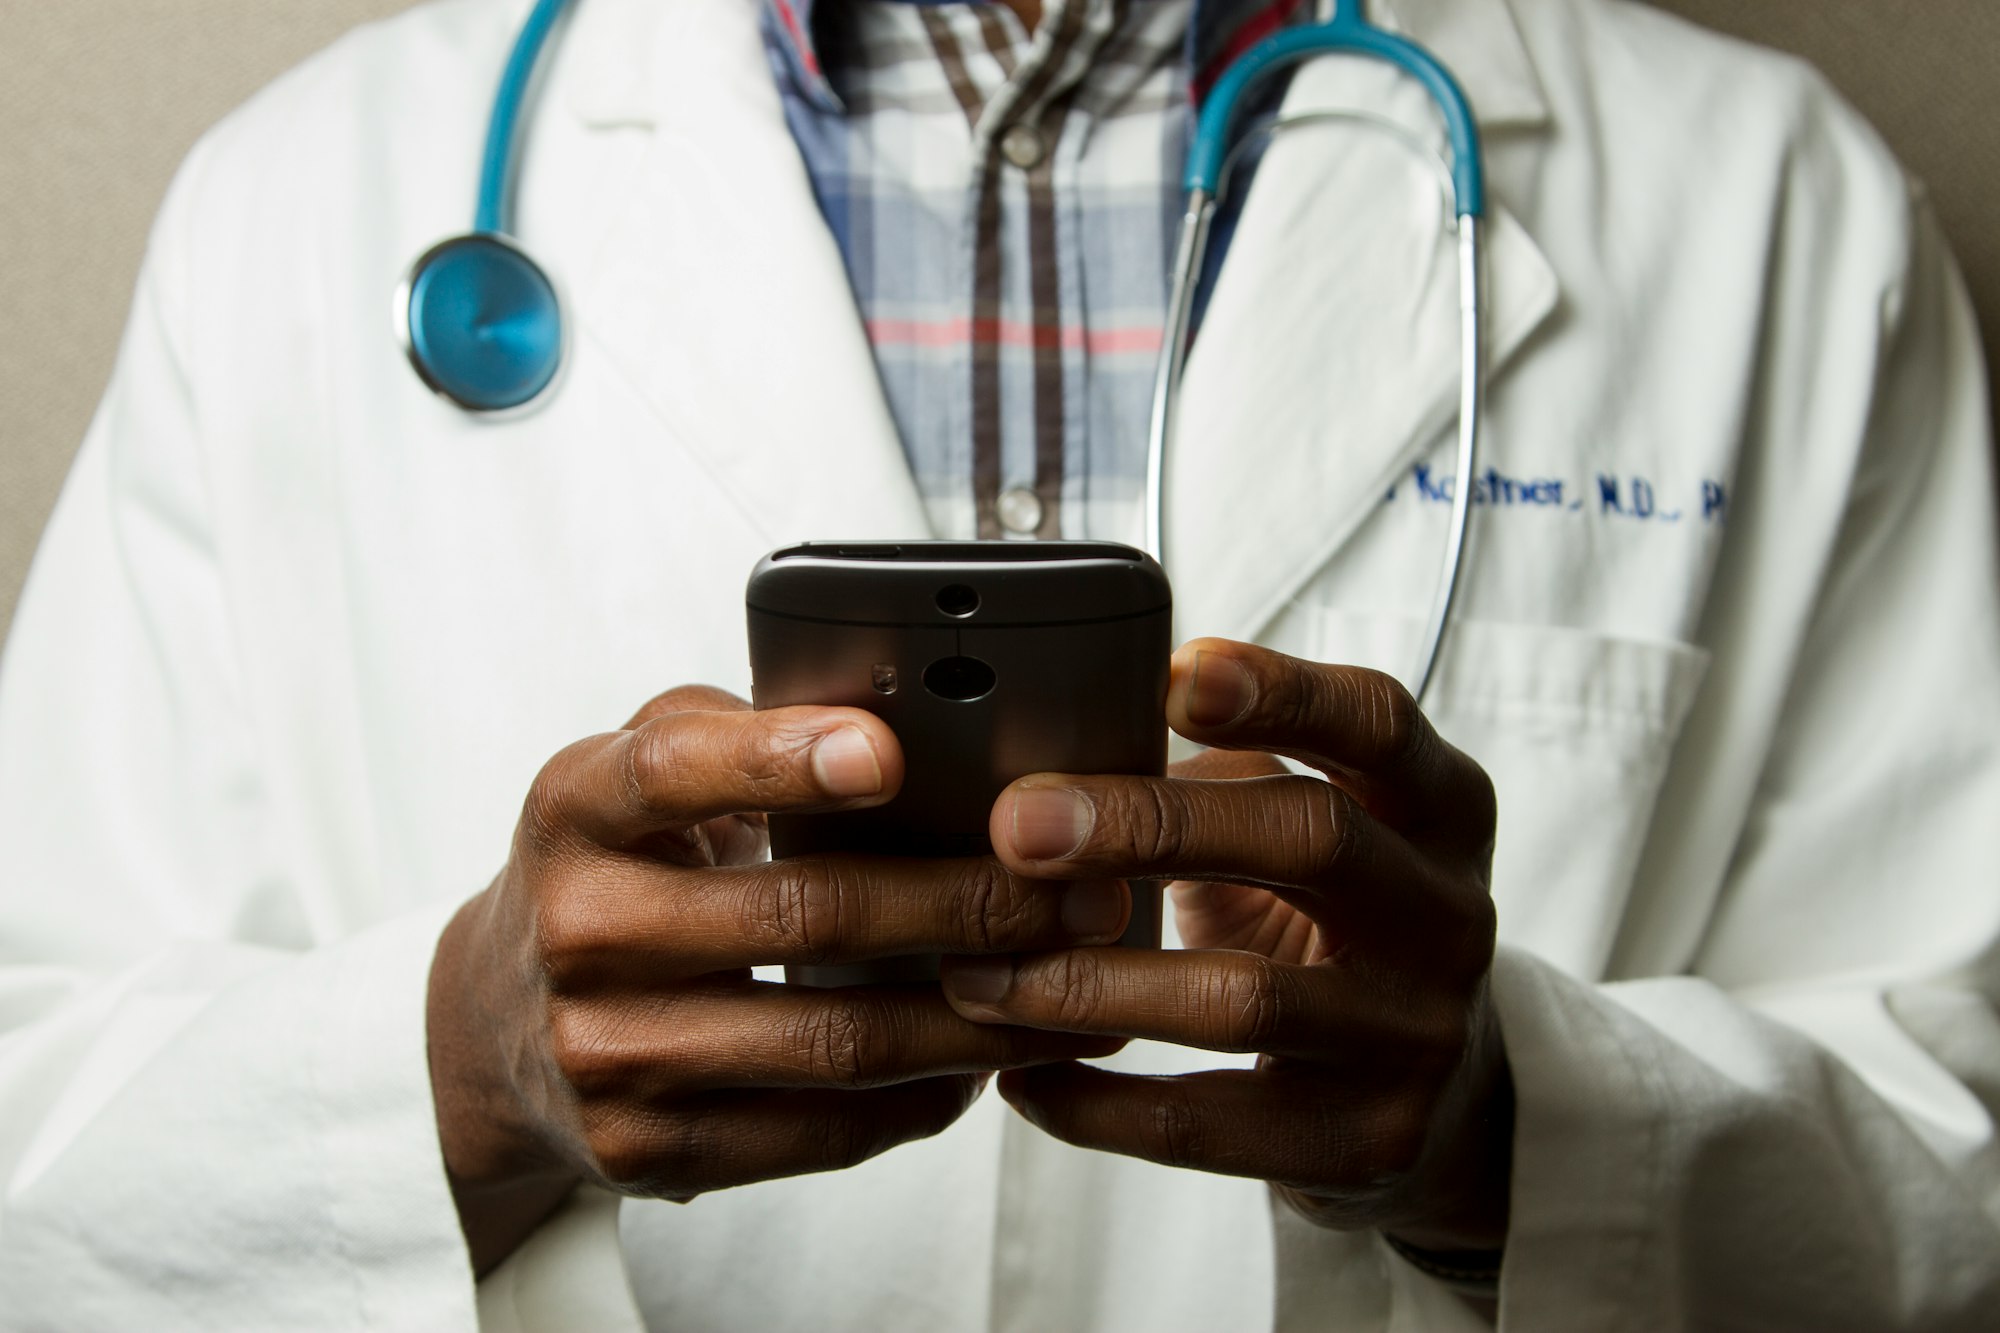 Doctor Holding Cell Phone. Cell phones and other kinds of mobile devices and communications technologies are of increasing importance in the delivery of health care. Photographer Daniel Sone  